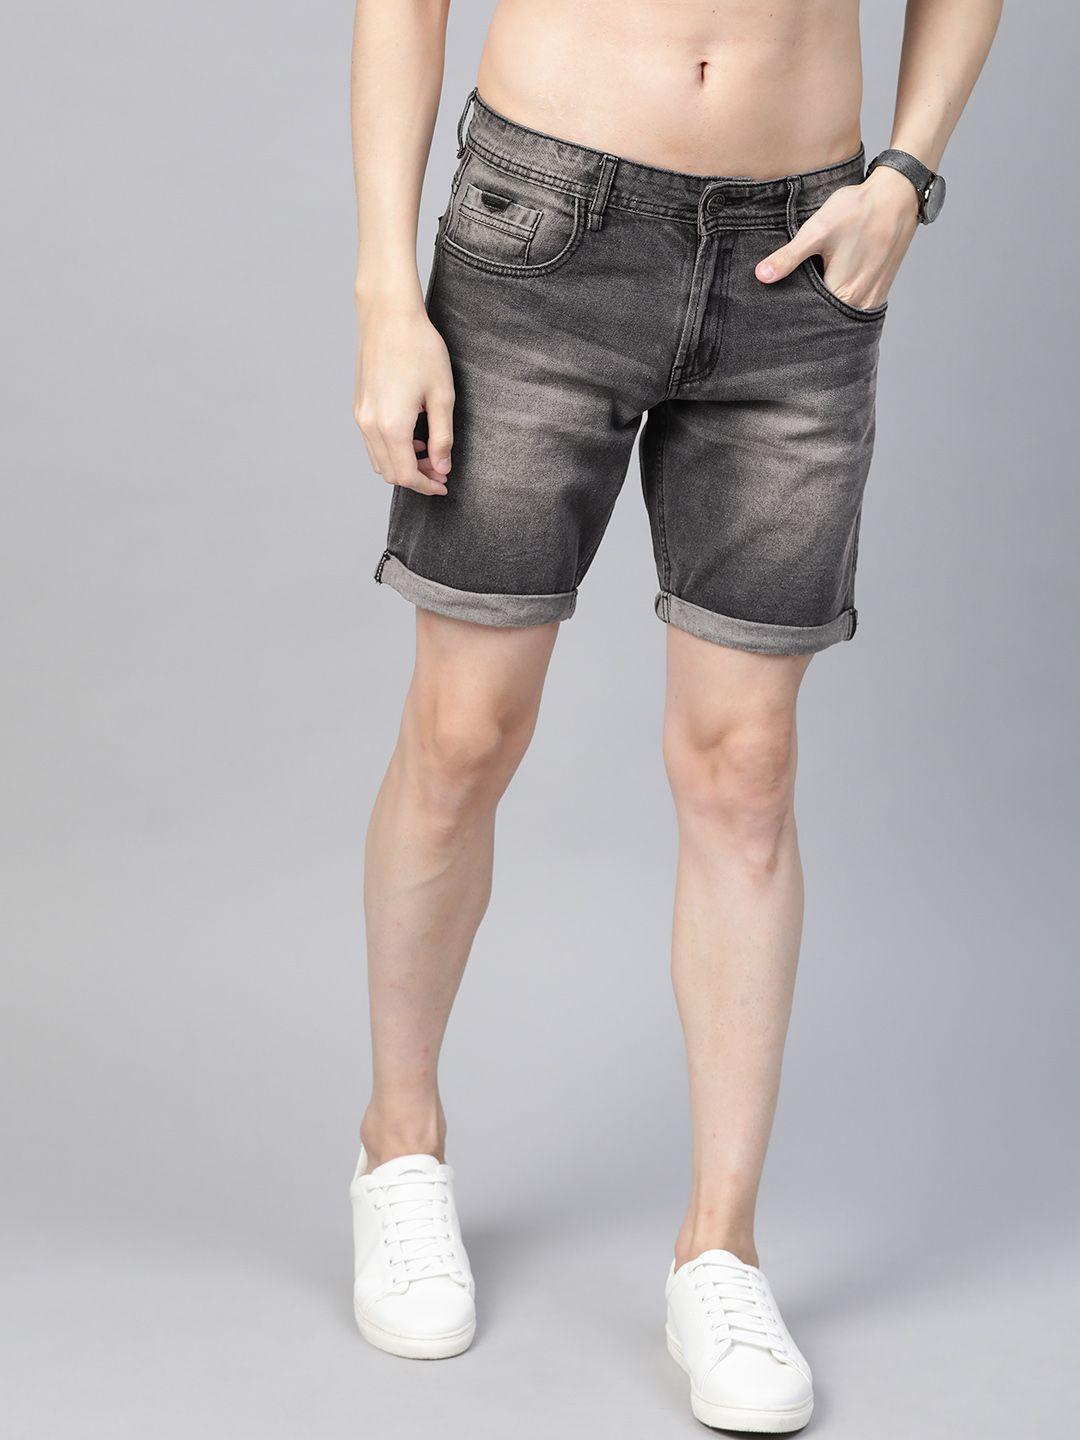 the roadster lifestyle co men charcoal grey washed mid-rise denim shorts